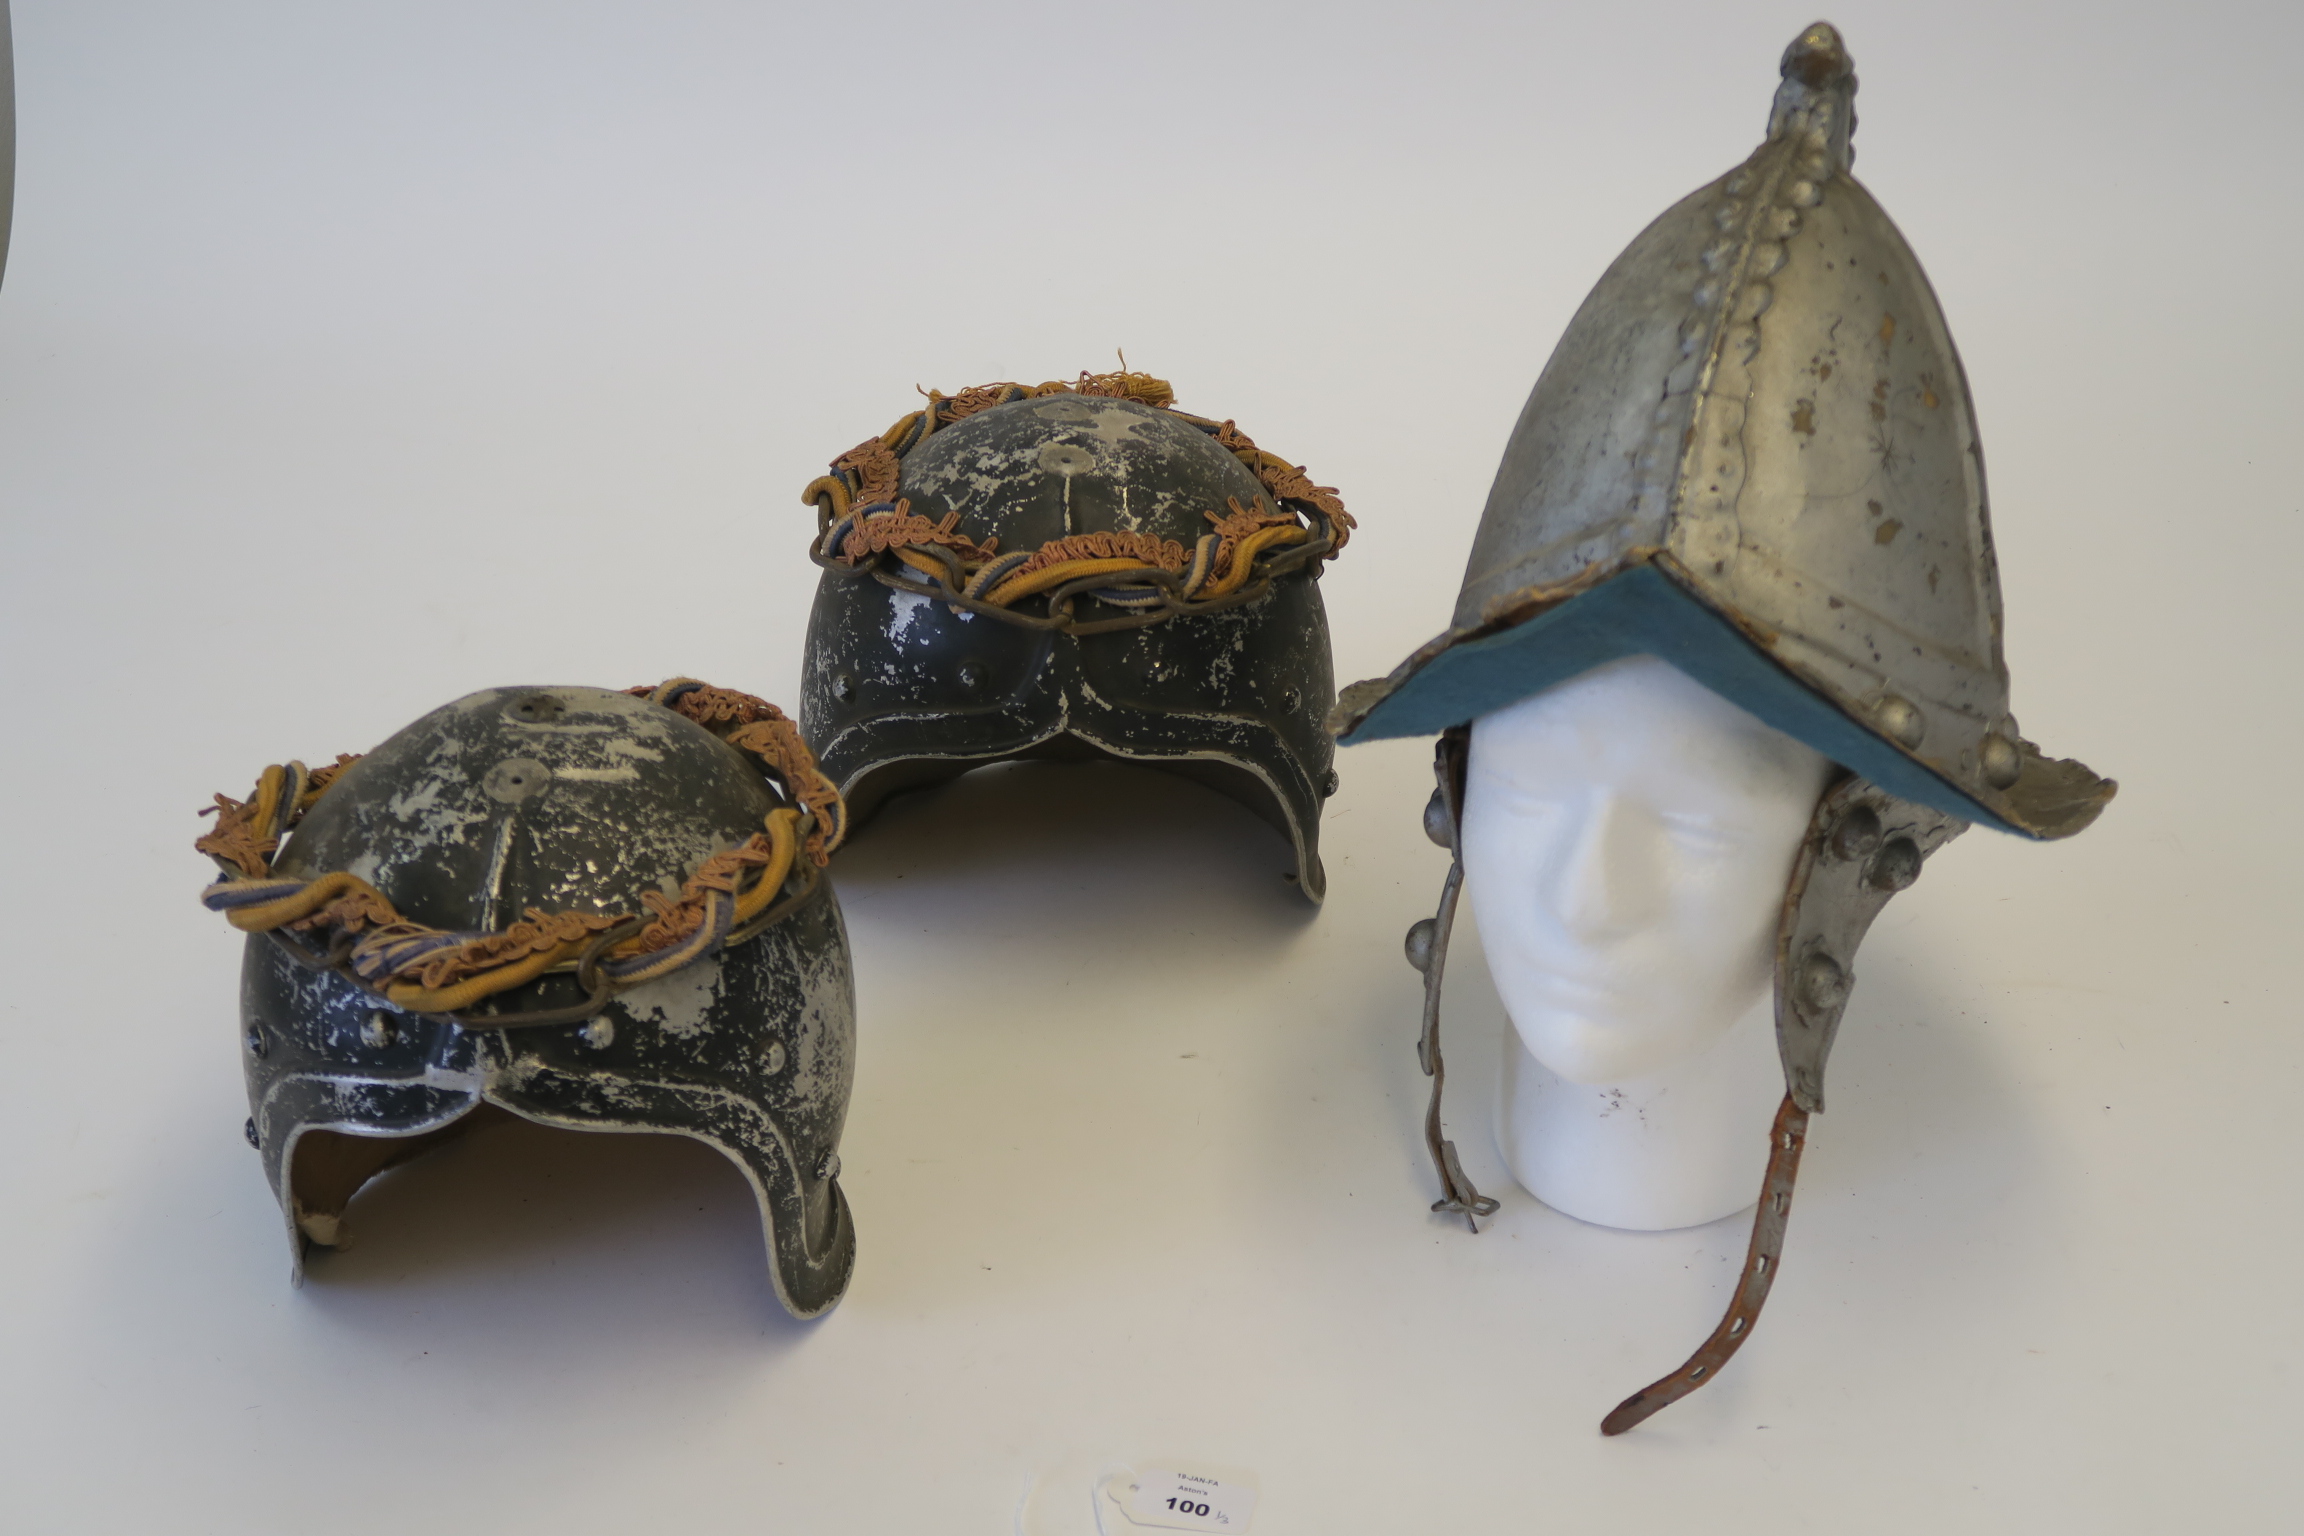 Three movie prop helmets - one Spanish Armada style with ear protector chin strap plus two metal